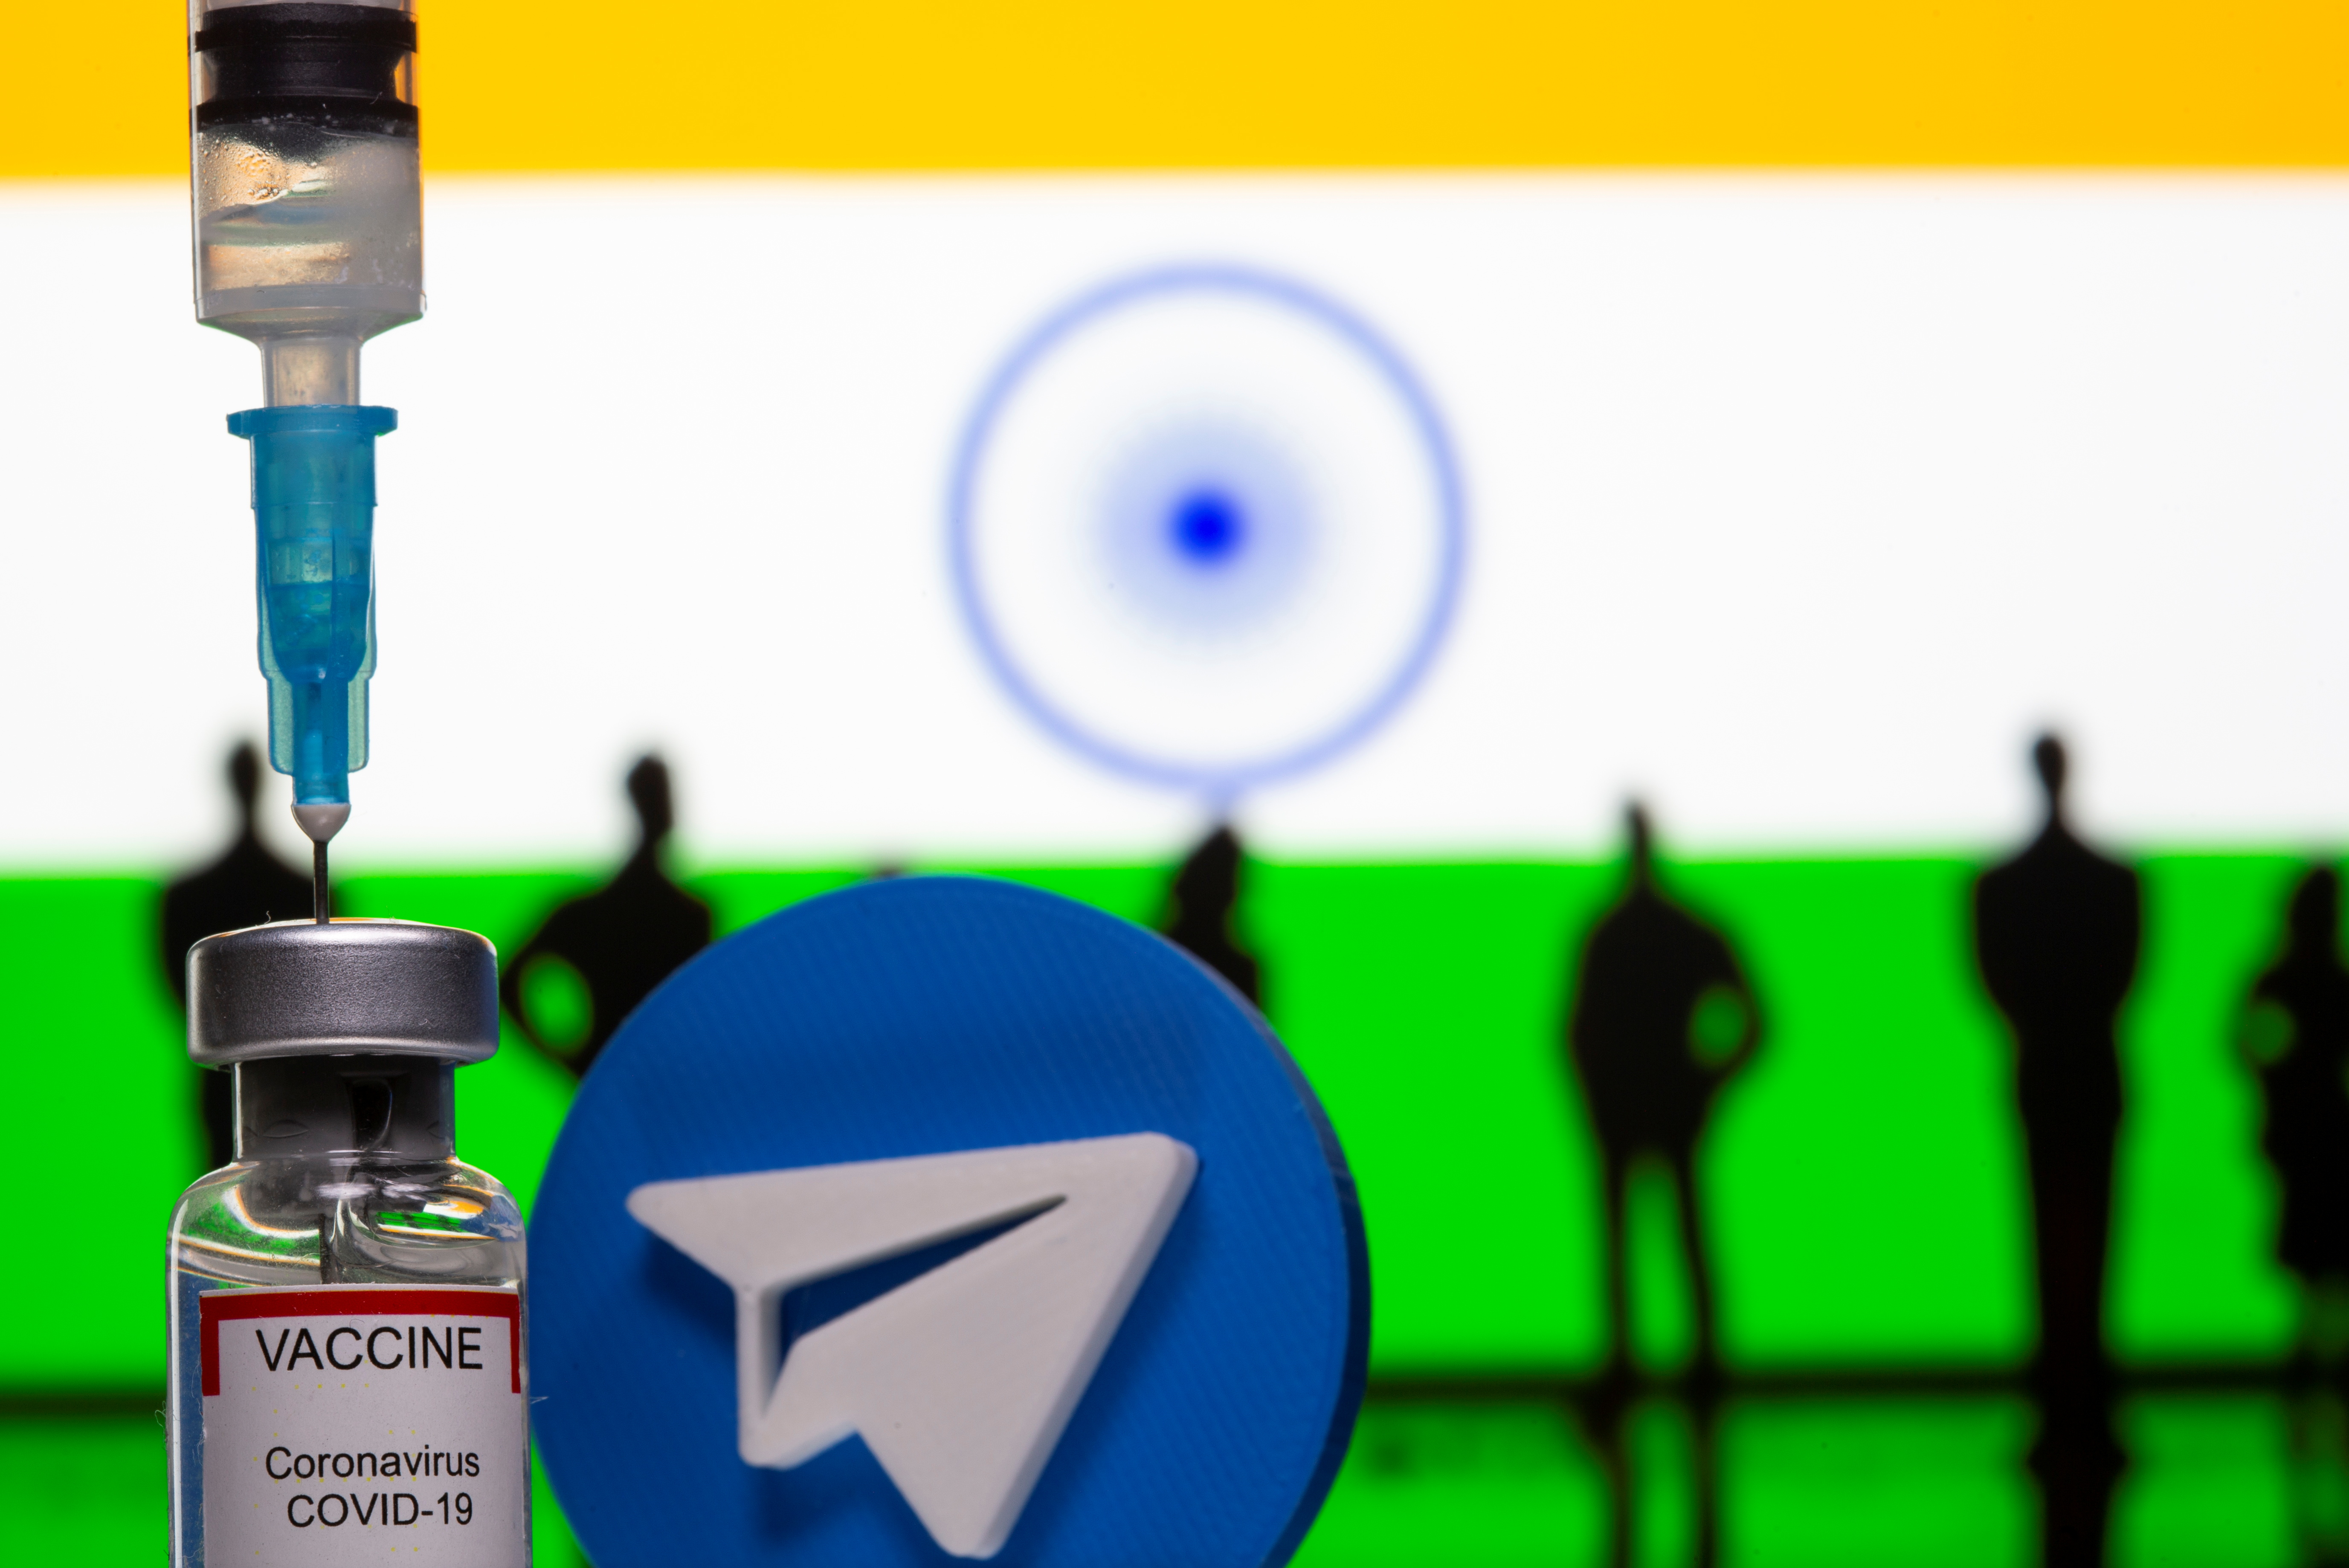 A 3D-printed Telegram app logo, small toy figurines, a syringe and vial labelled 